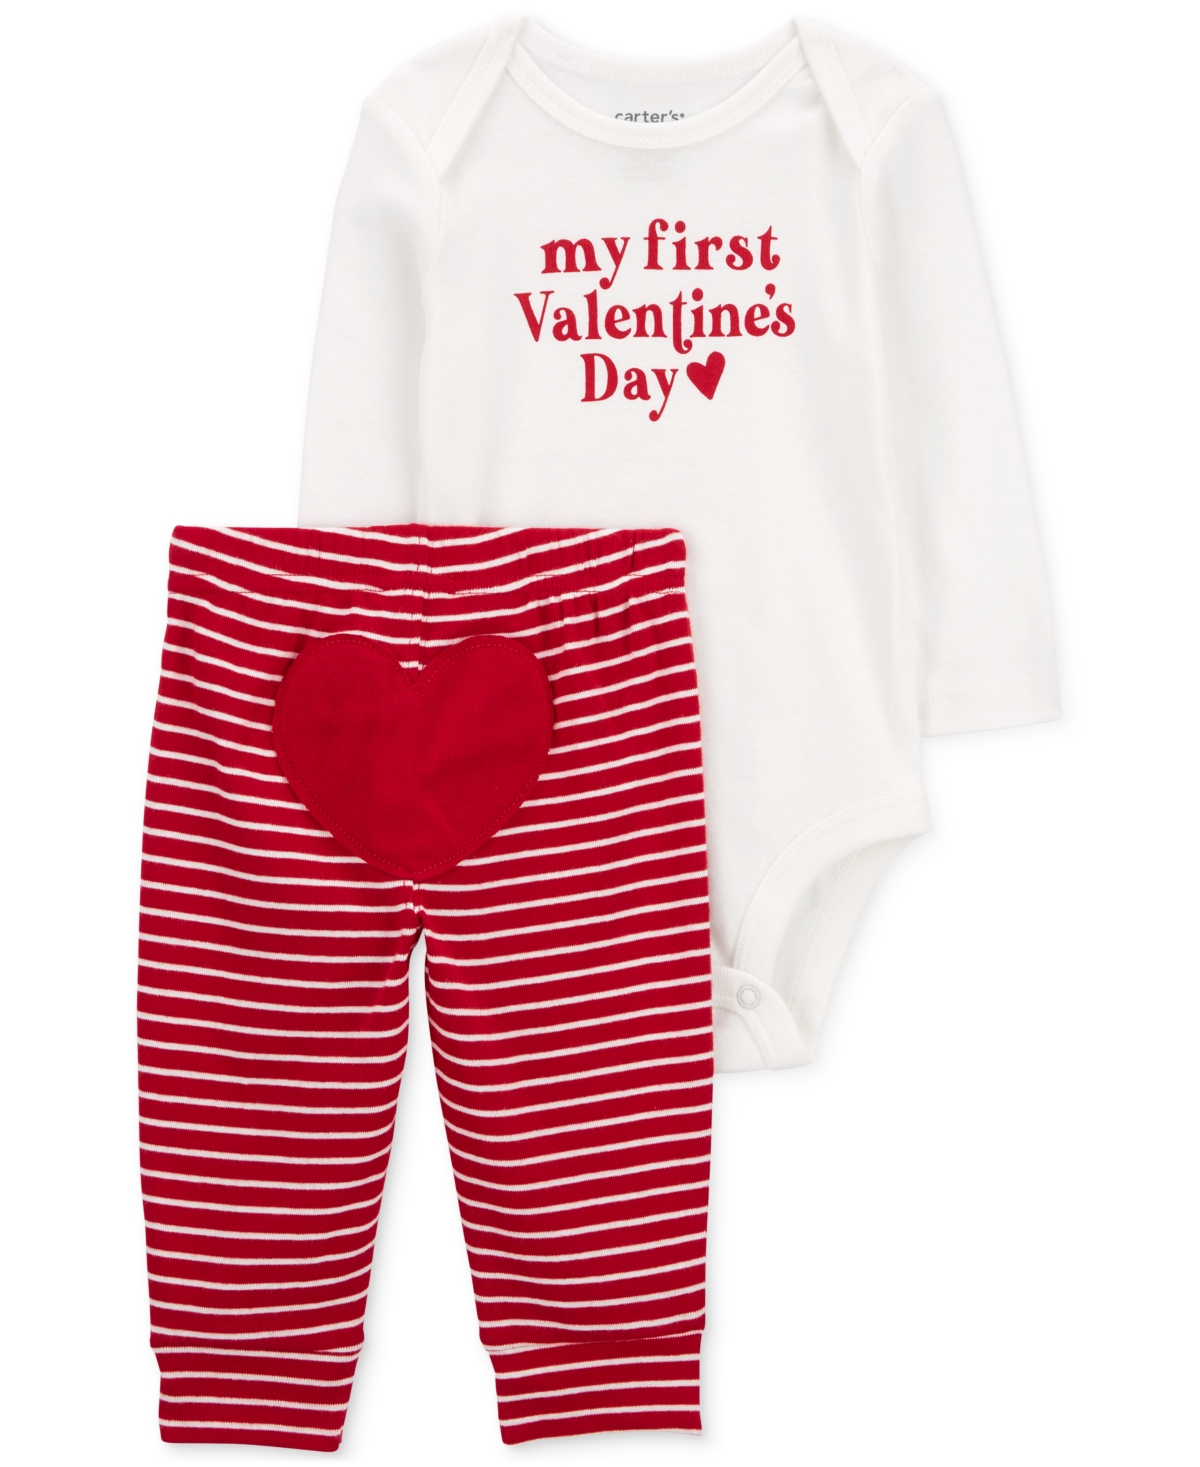 Carter's Baby My First Valentine's Day Cotton Bodysuit And Pants, 2 Piece Set In Red